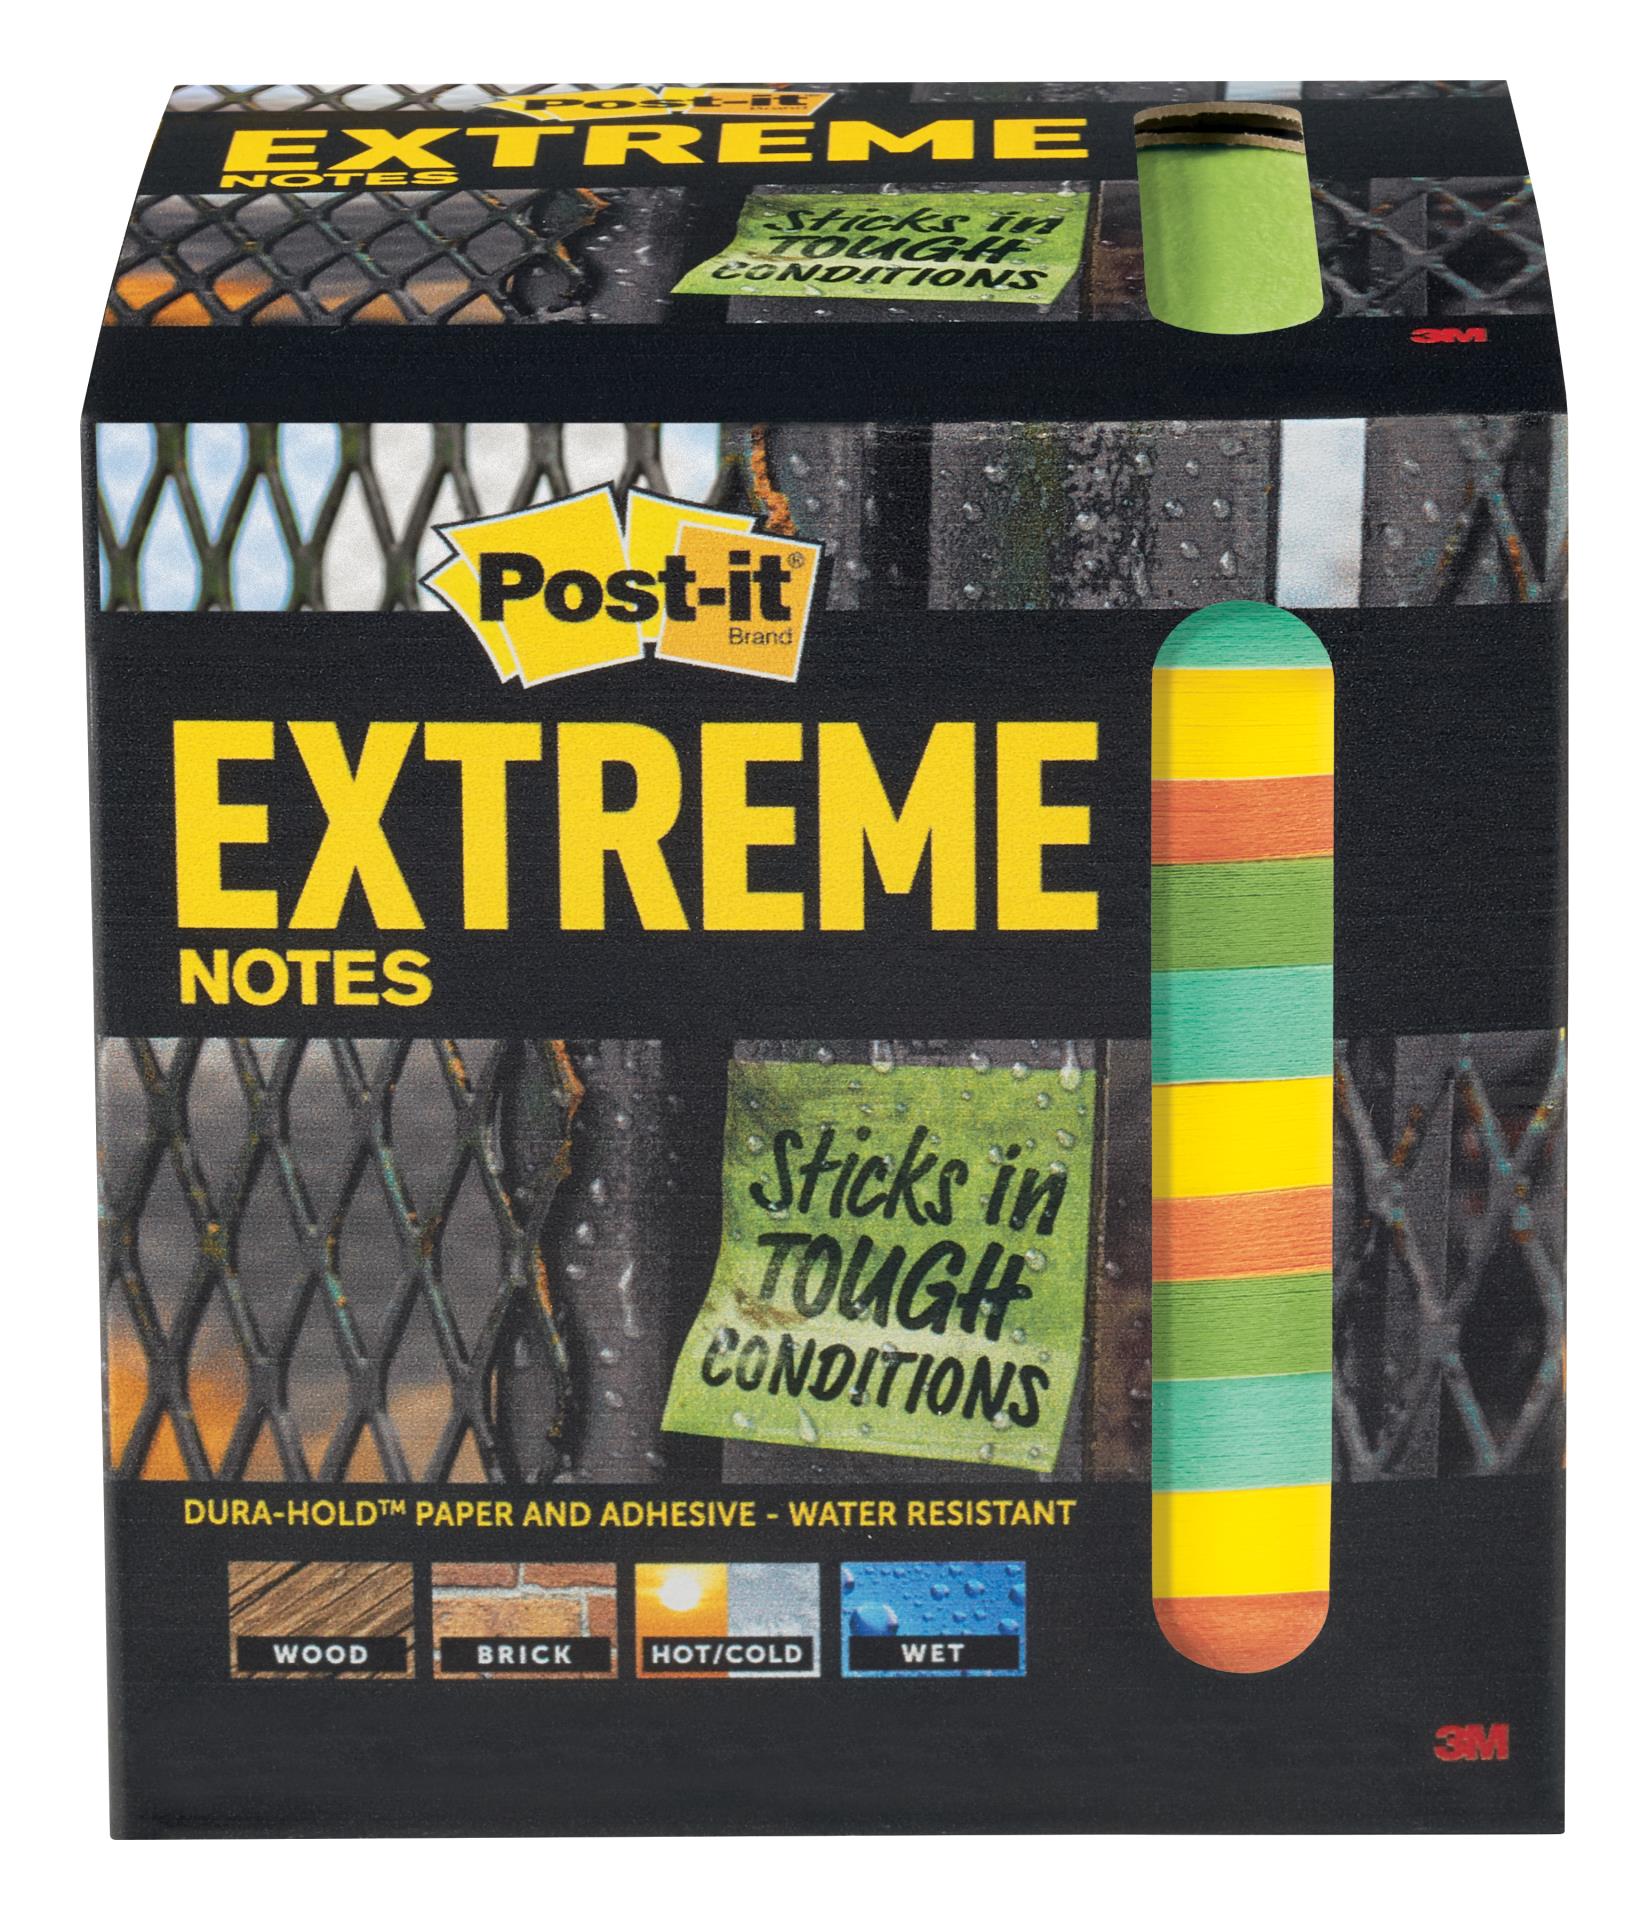 7100156011 - Post-it® Extreme Notes, EXTRM33-12TRYX, 3 in x 3 in (76 mm x 76 mm)